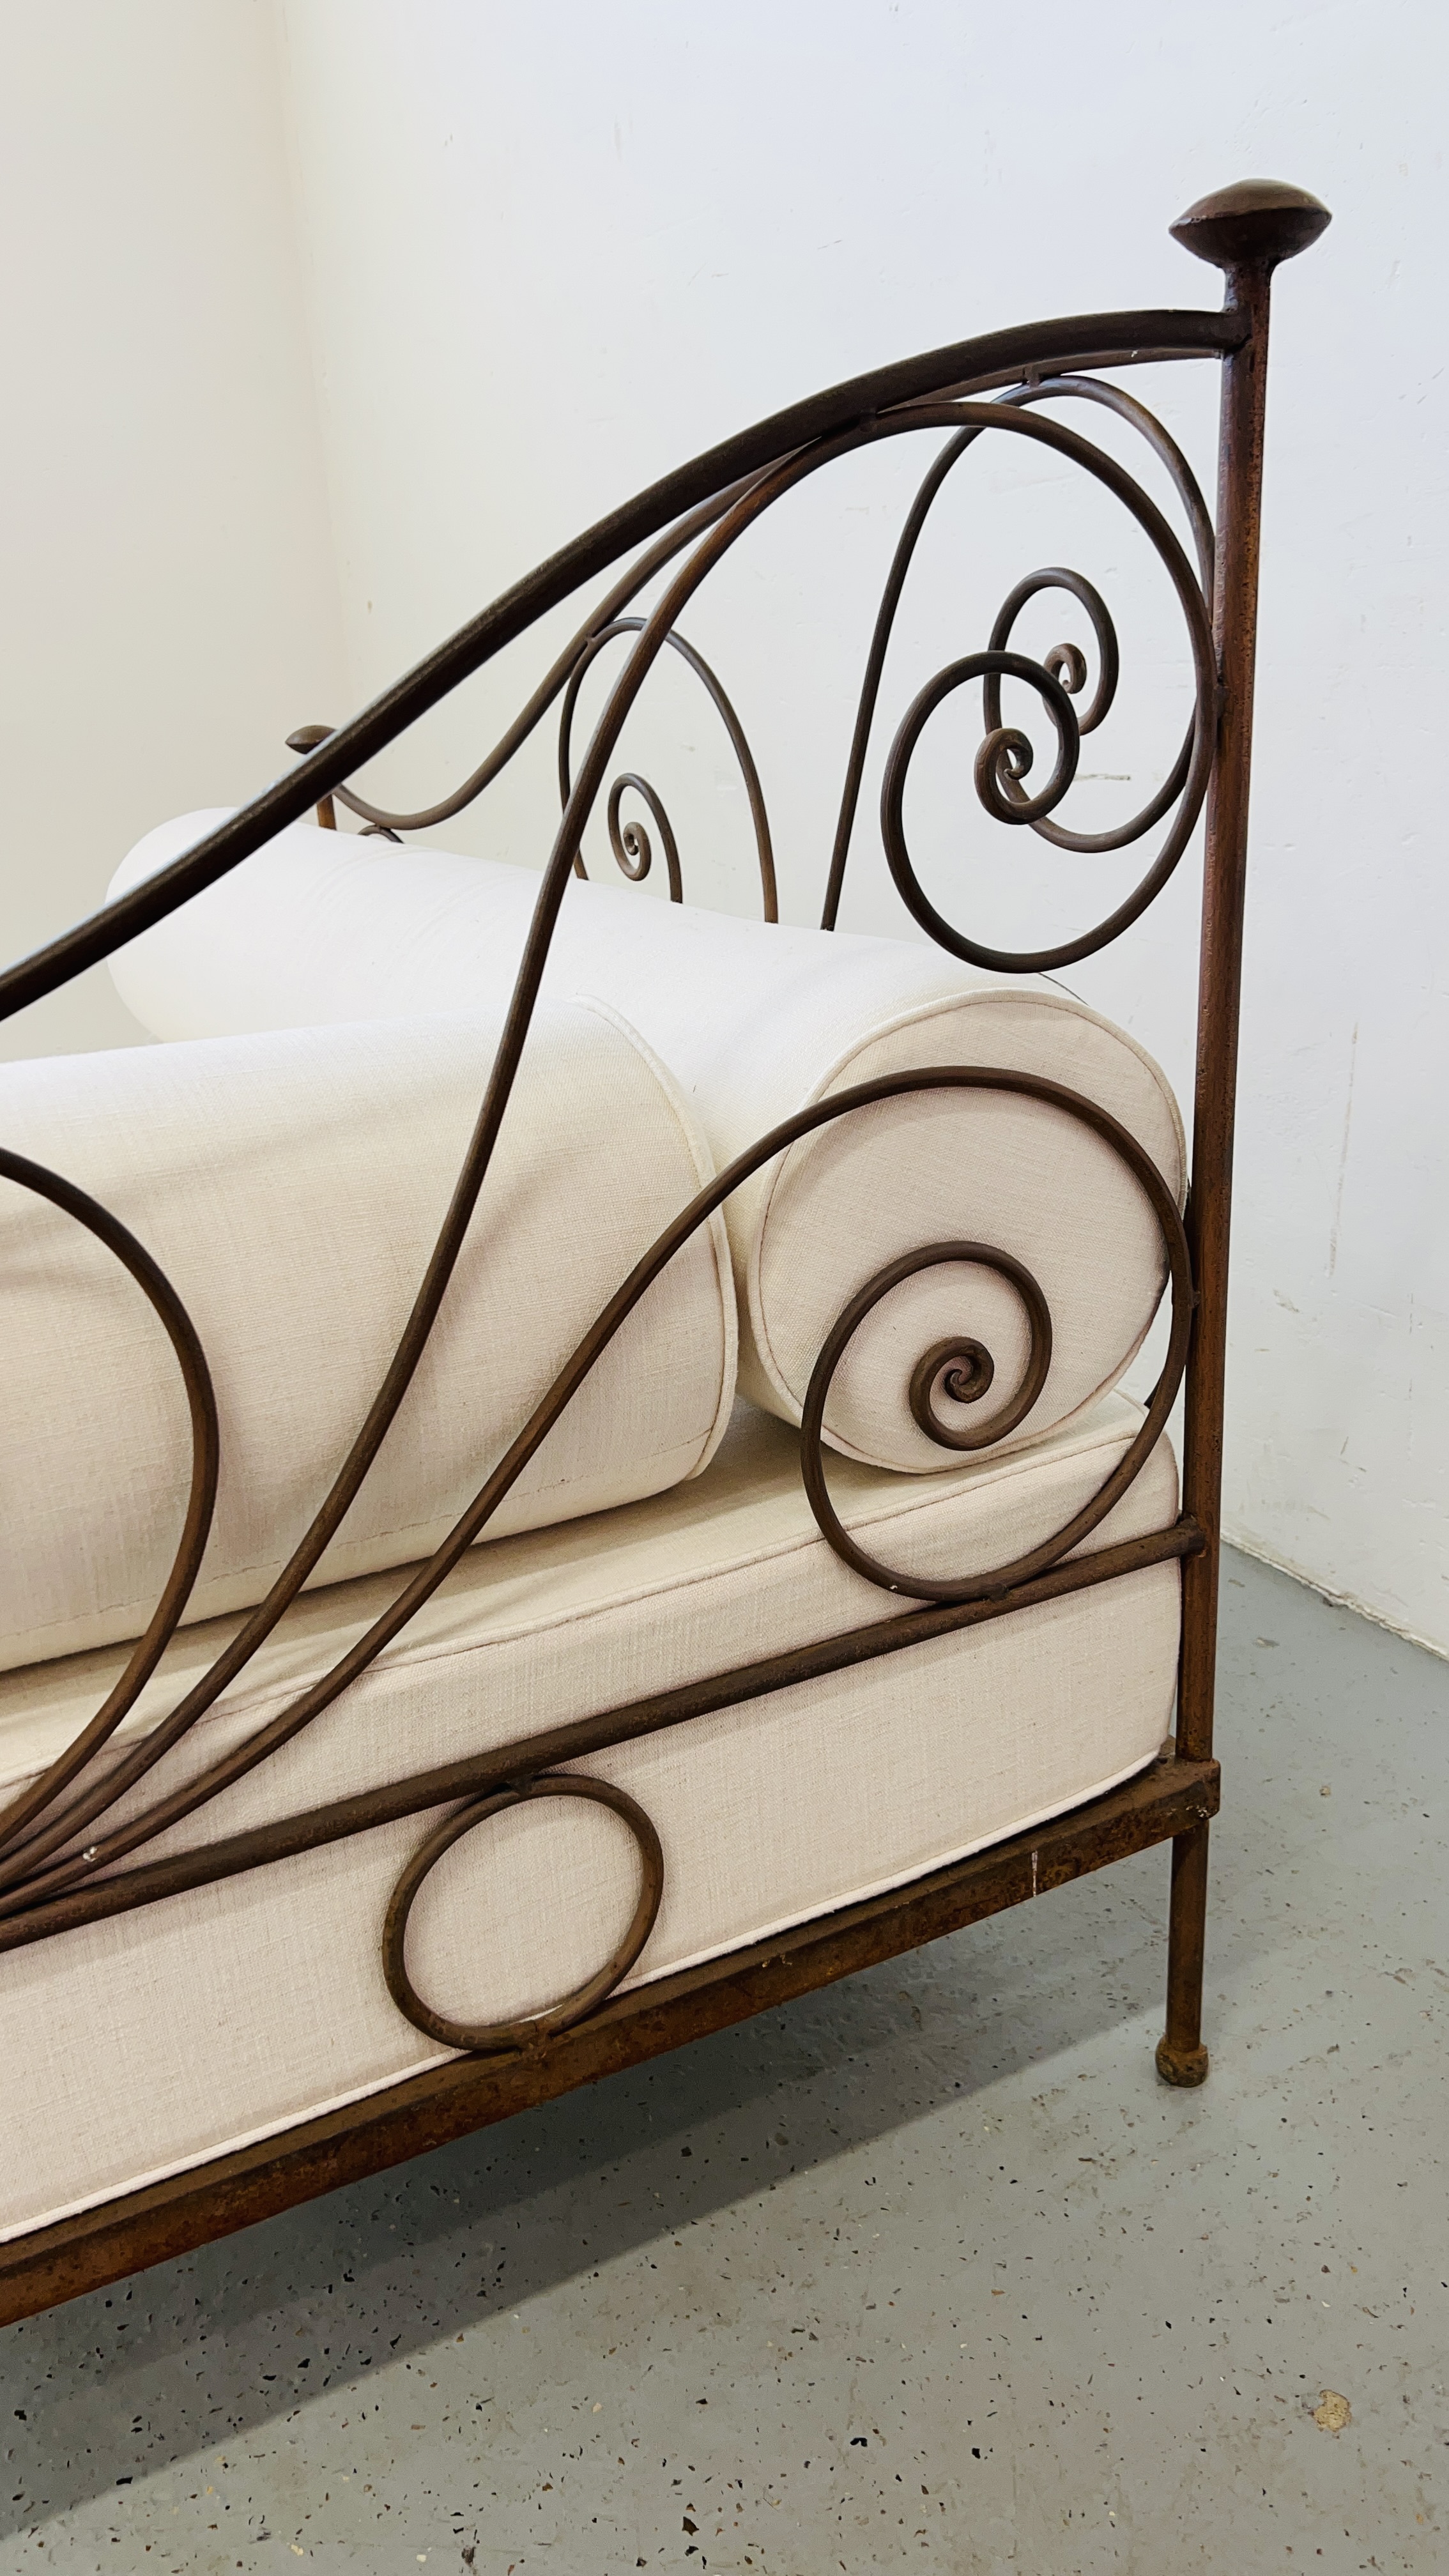 A FRENCH STYLE METALCRAFT CHAISE LOUNGE WITH CREAM UPHOLSTERED BASE AND BOLSTER CUSHIONS LENGTH - Image 11 of 13